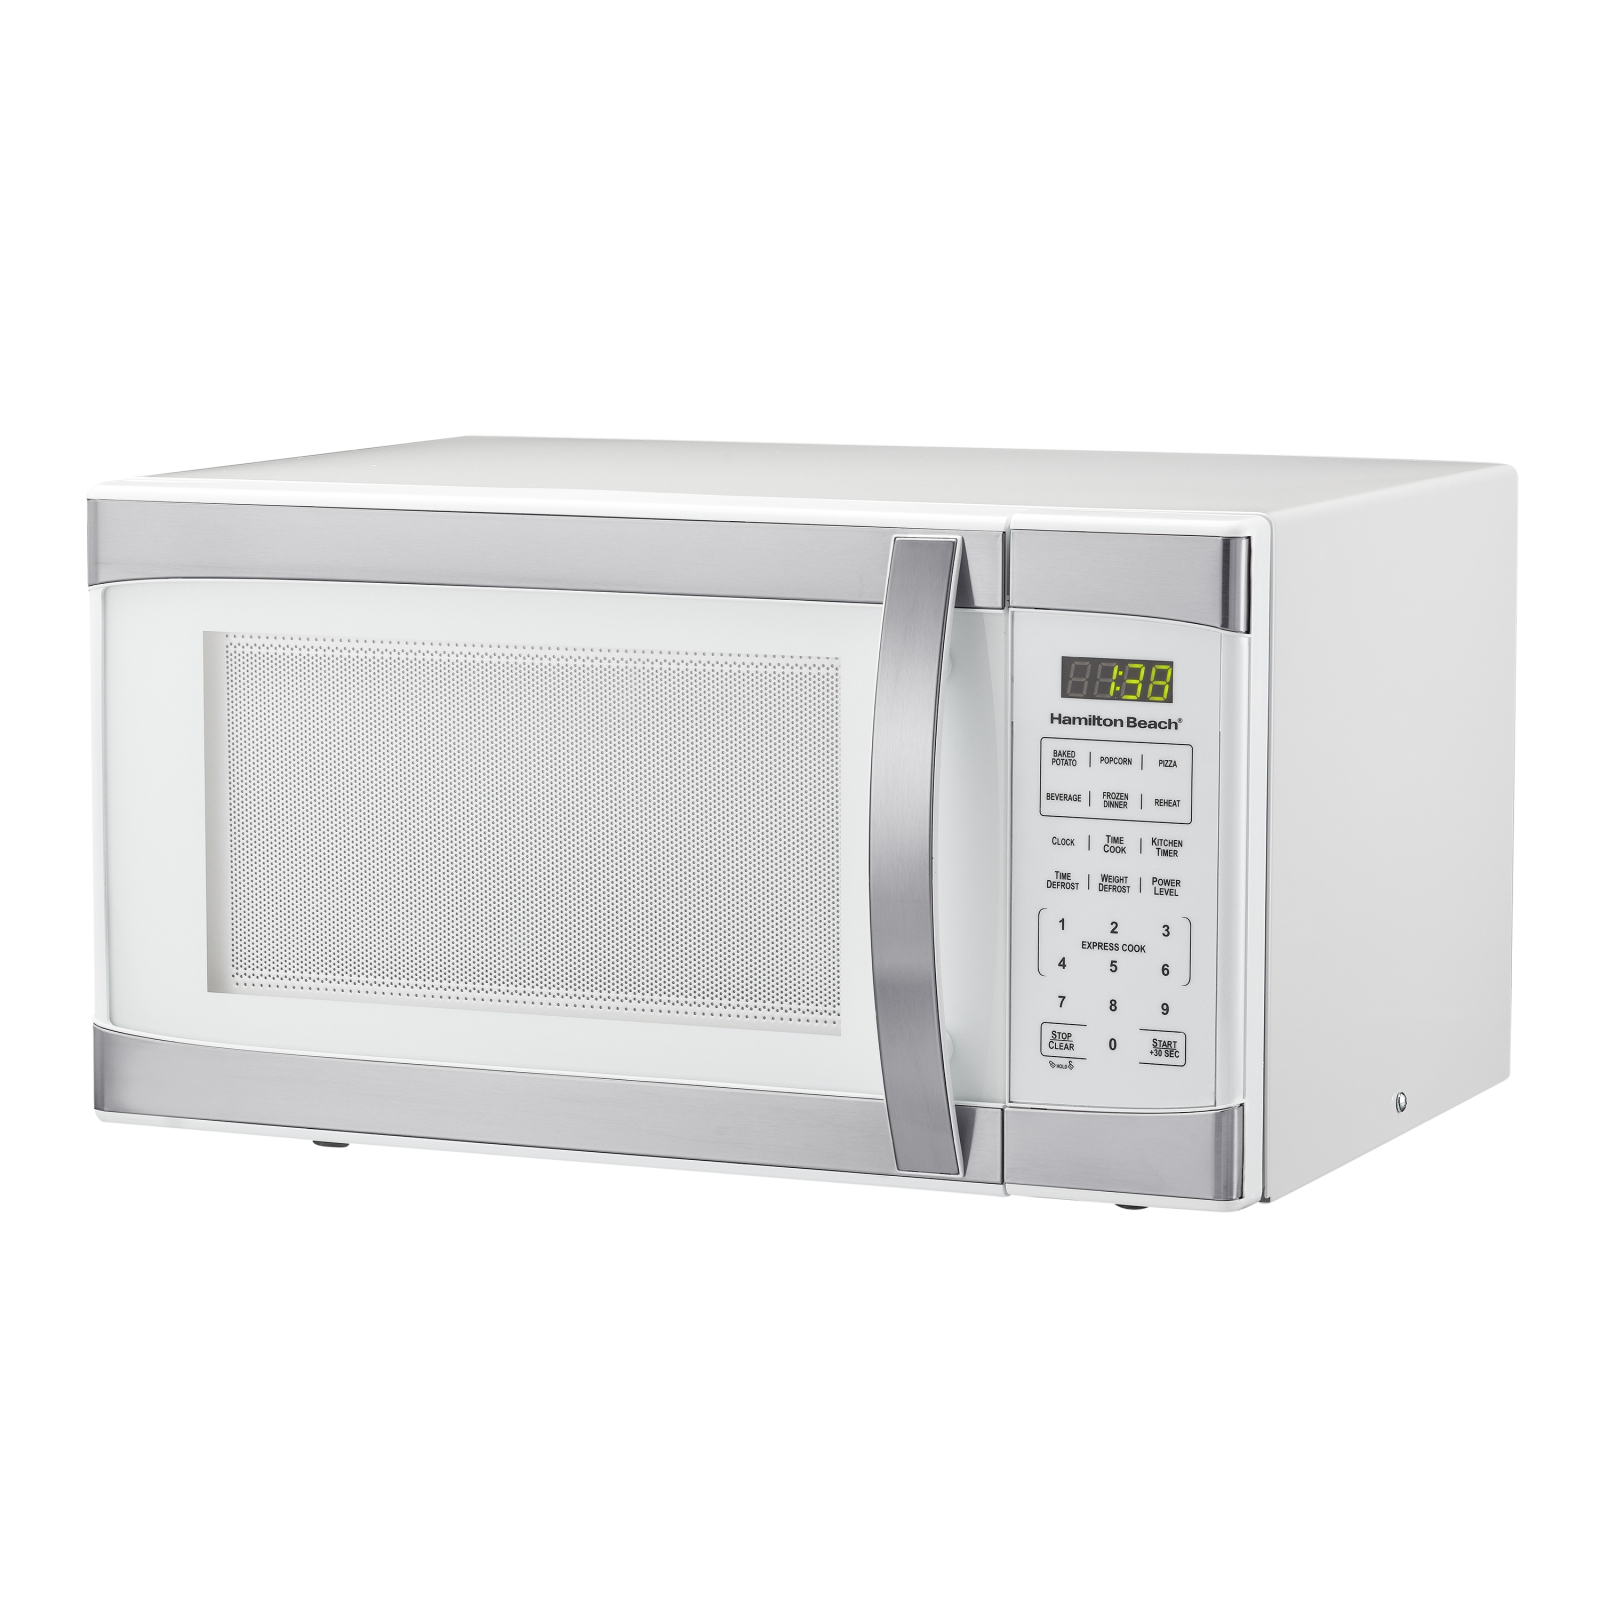 Hamilton Beach 1.1 Cu.ft White with Stainless Steel Digital Microwave Oven - image 1 of 5